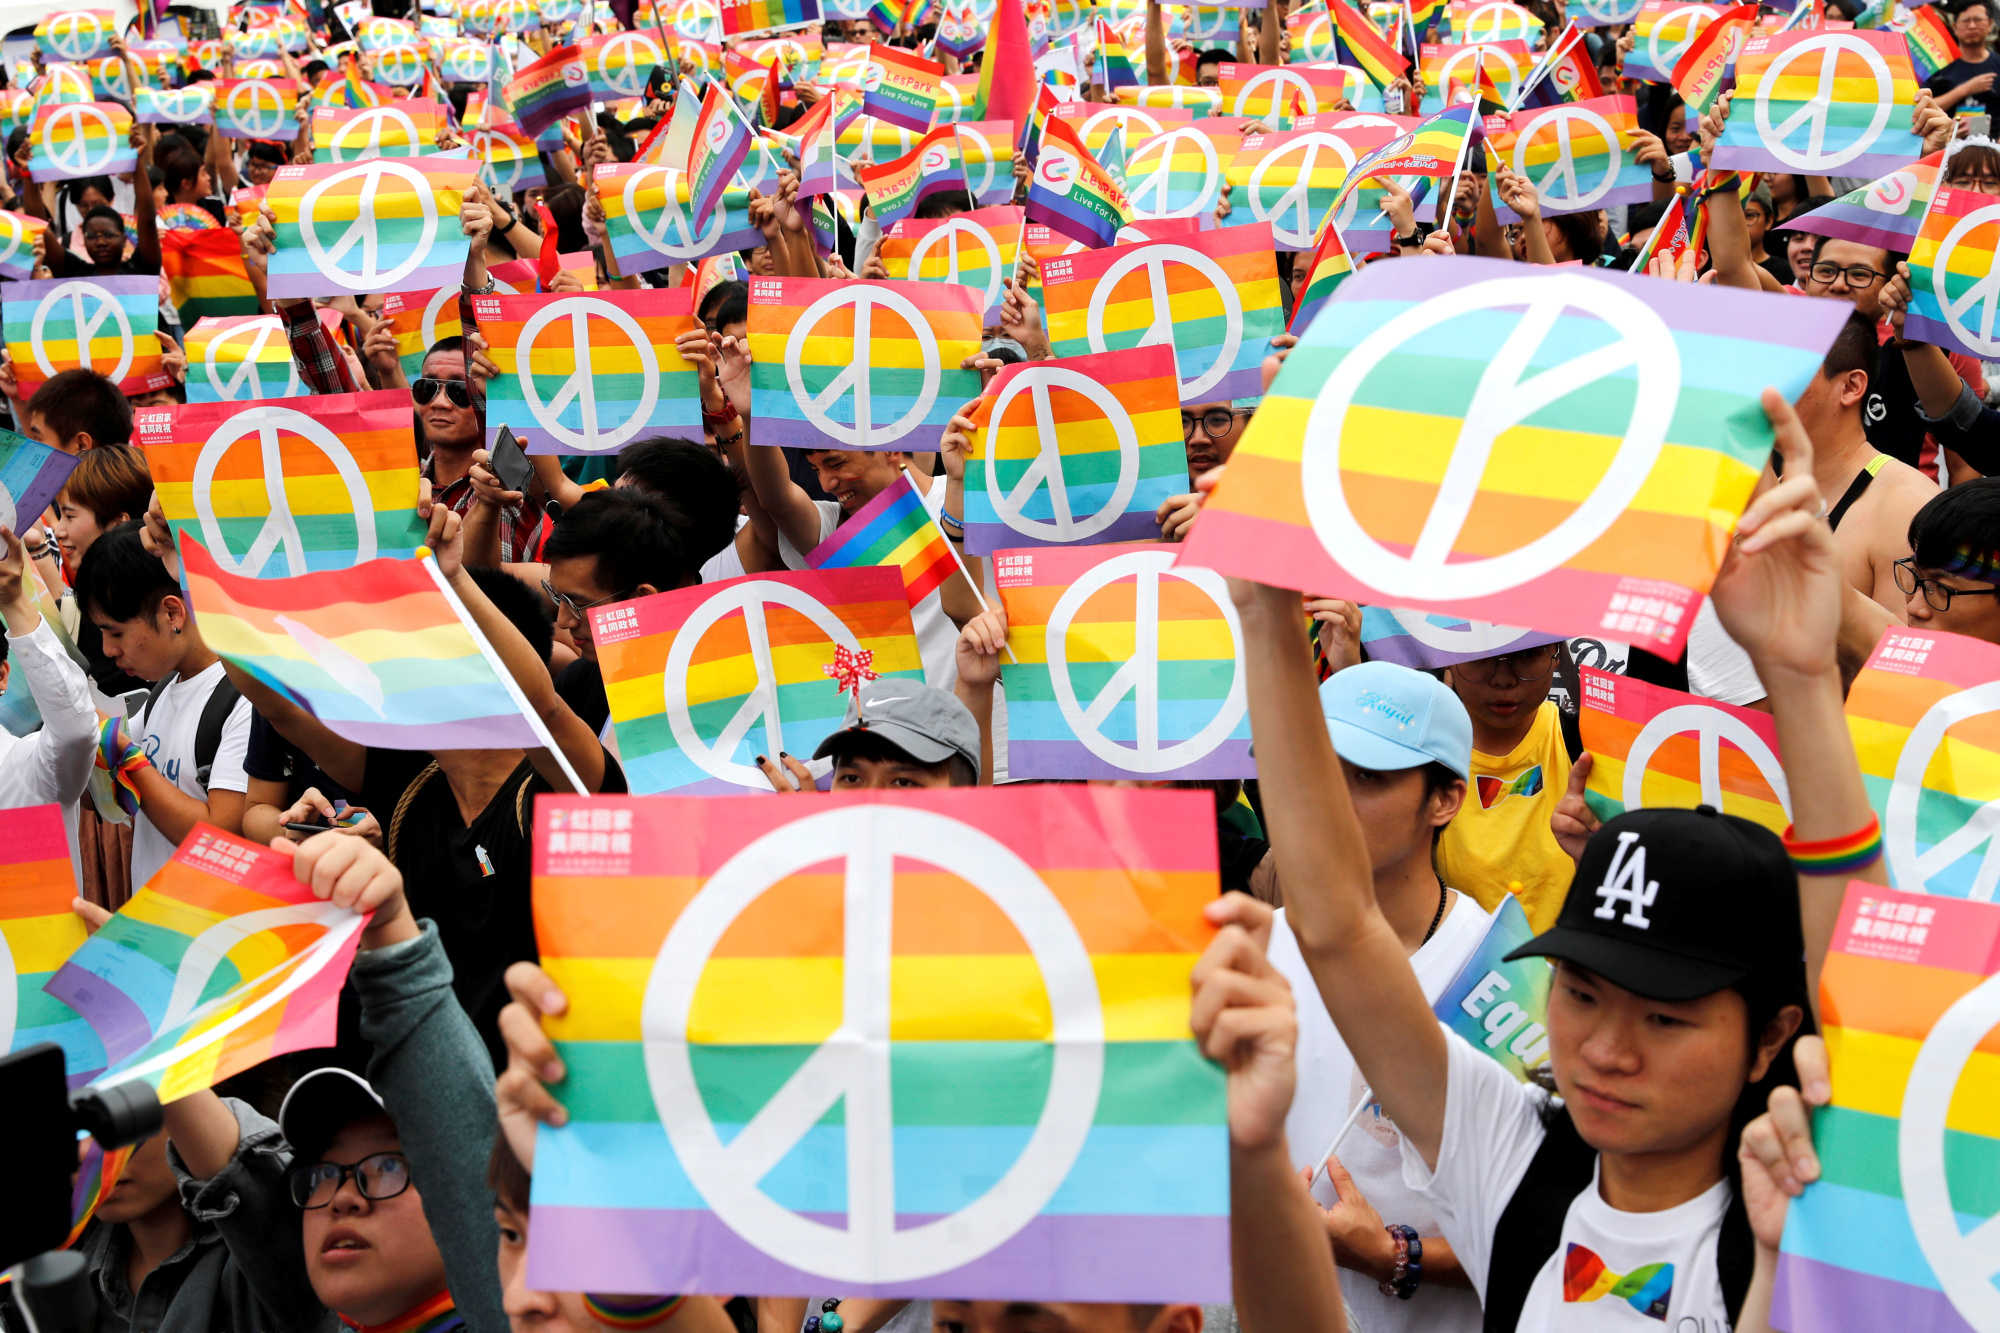 Same-sex marriage supporters take part in a lesbian, gay, bisexual and transgender pride parade in Kaohsiung, Taiwan, at the end of November last year after losing in a marriage equality referendum. | REUTERS